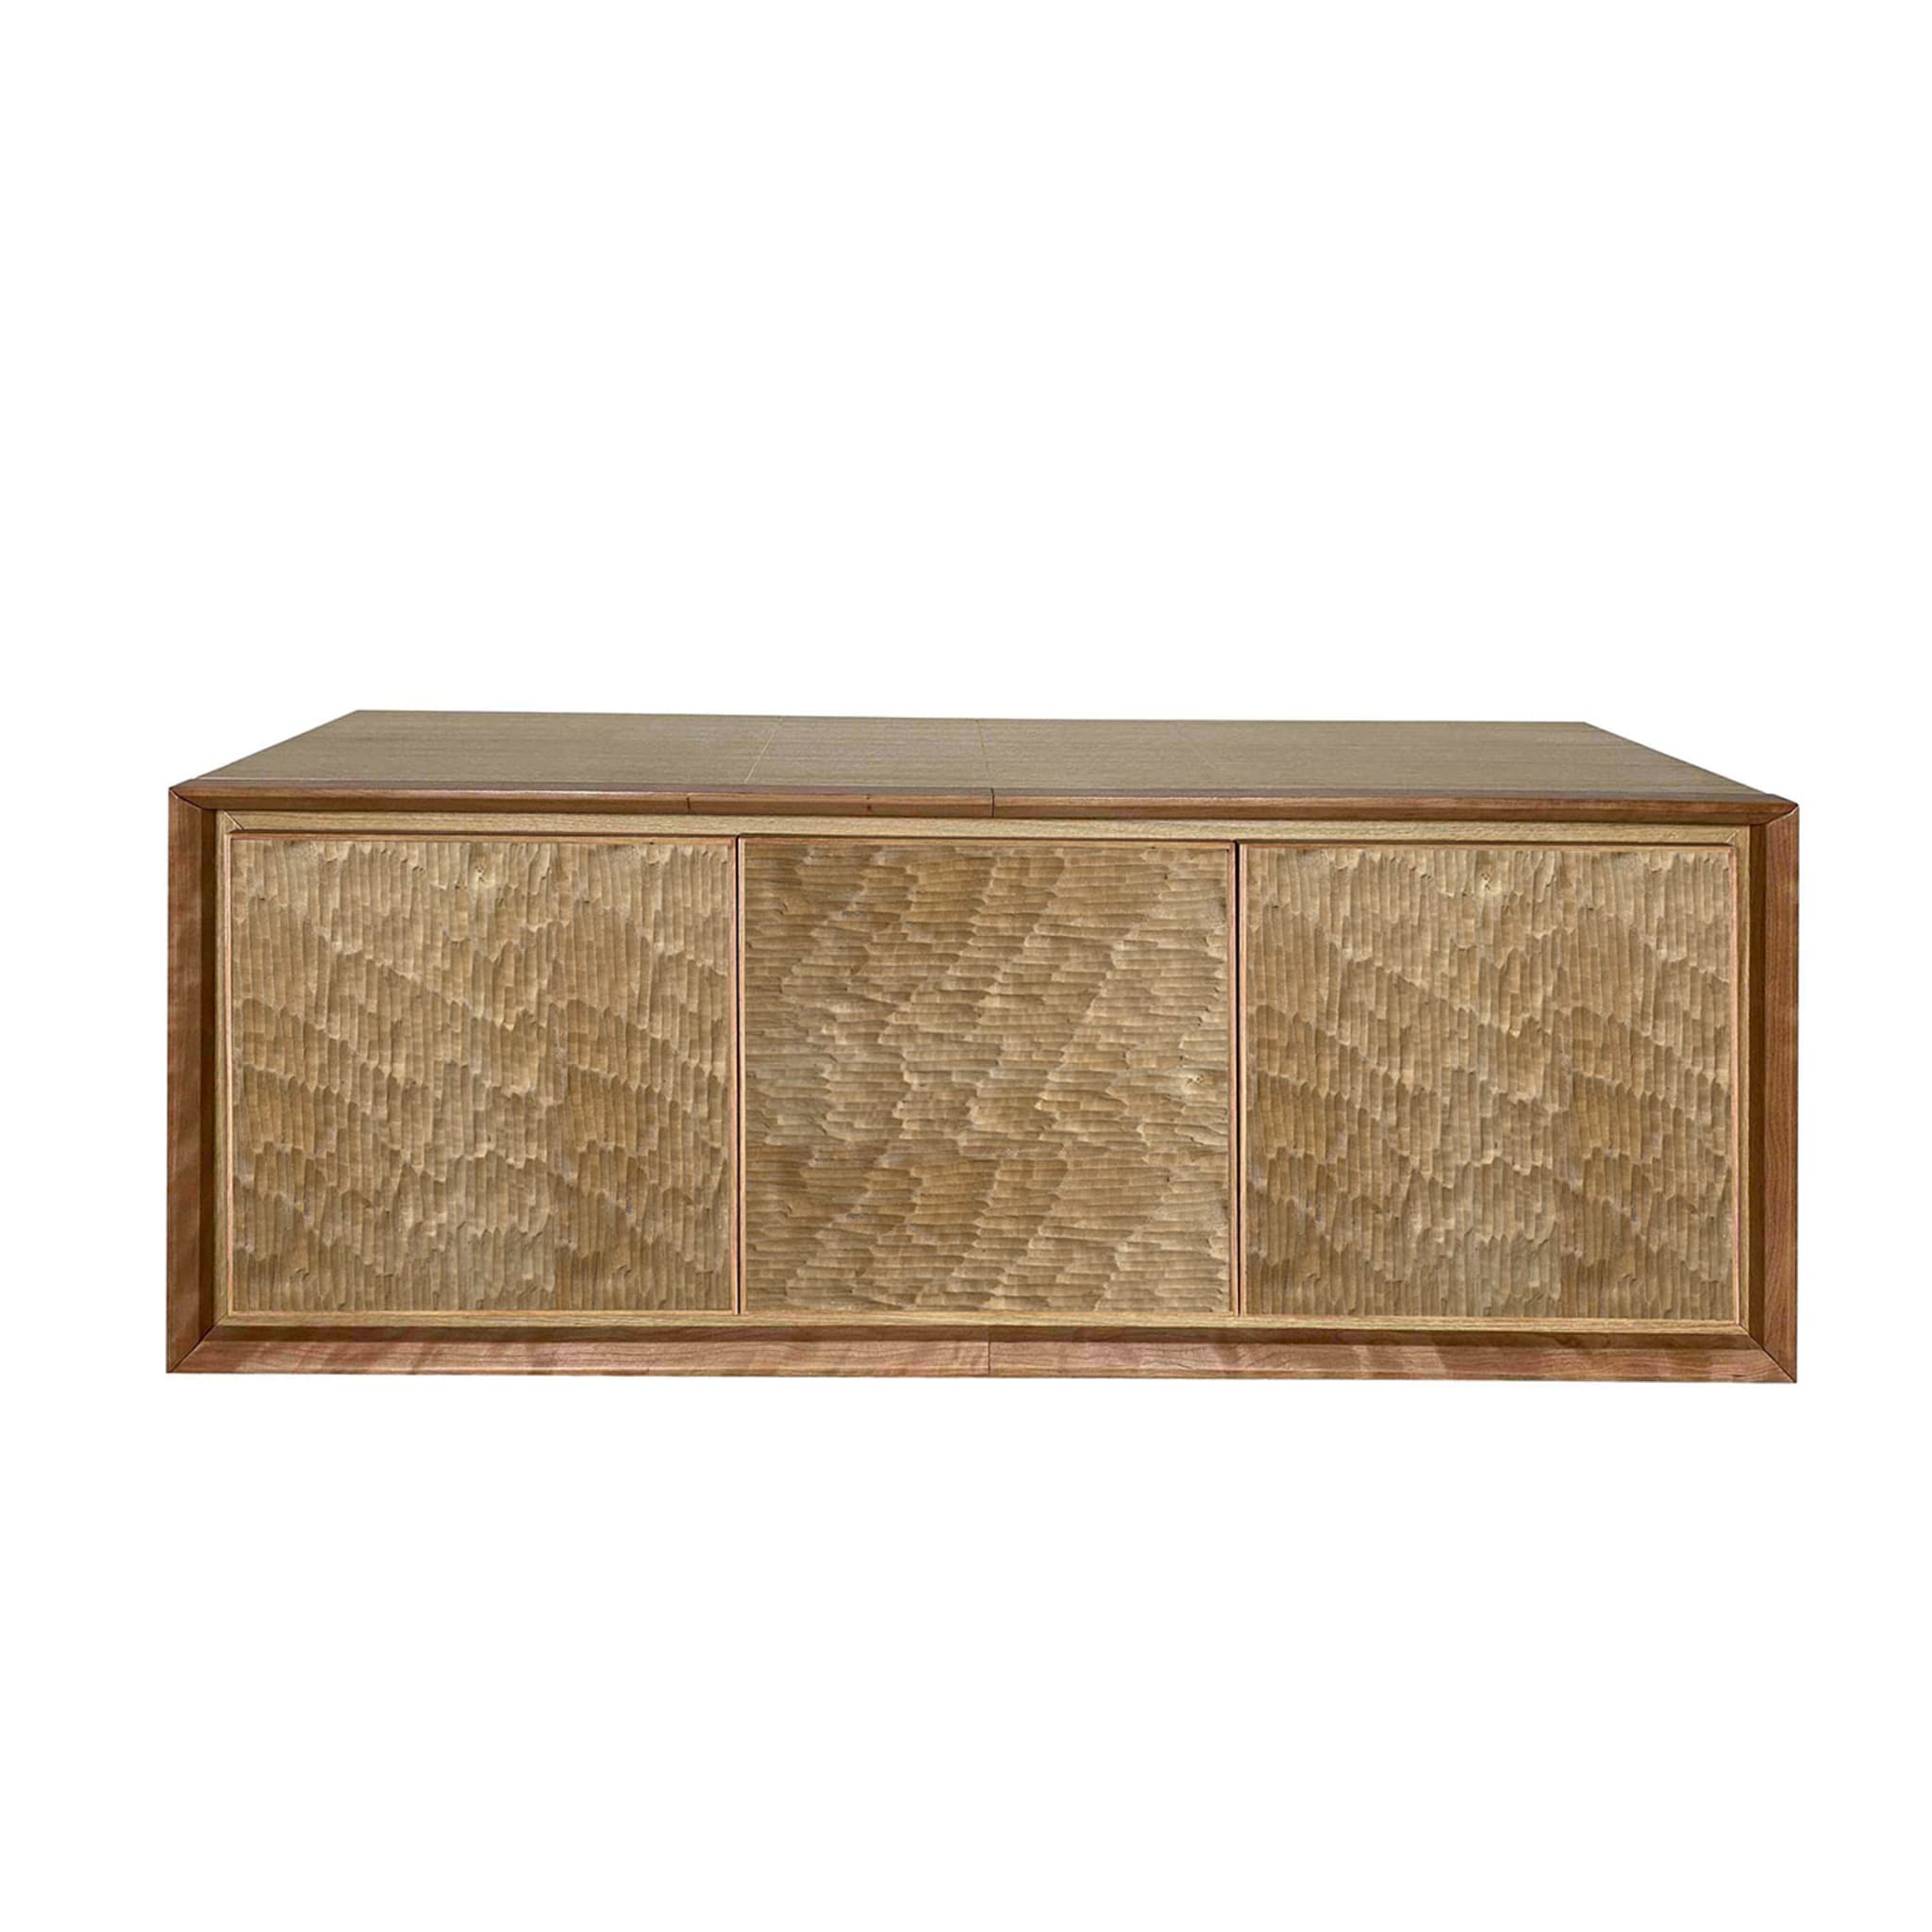 Scolpita 3-Door Carved Wall Sideboard by Mascia Meccani - Alternative view 1